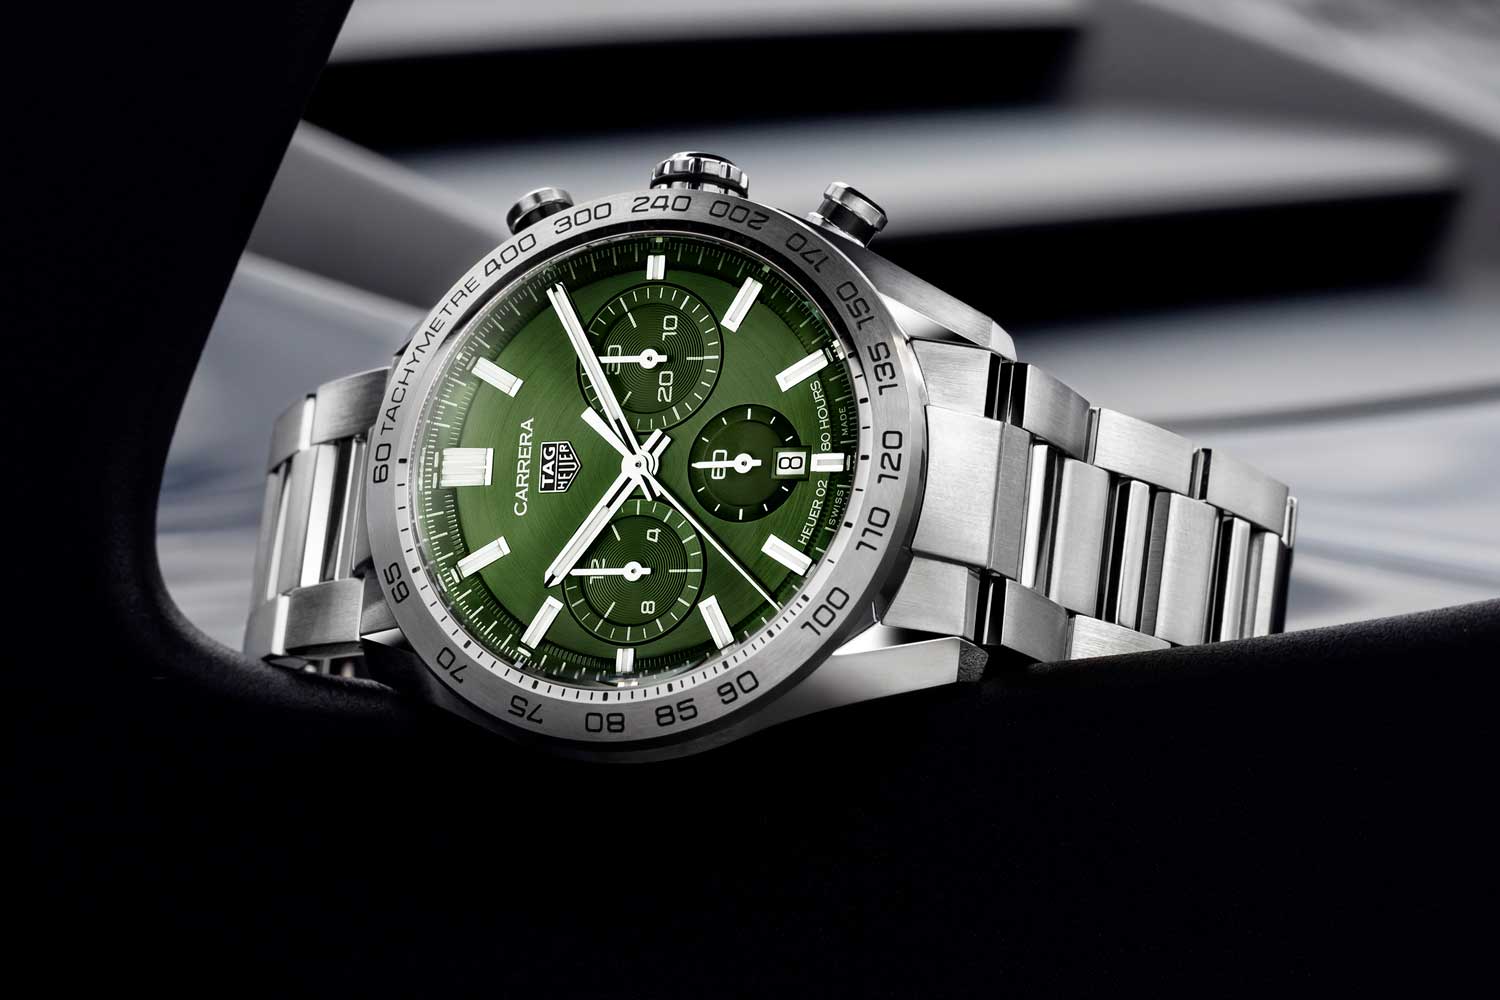 TAG Heuer Carrera Sport Chronograph 44m seen here in the green dial variation which has a steel bezel with its tachometer etched directly on the surface